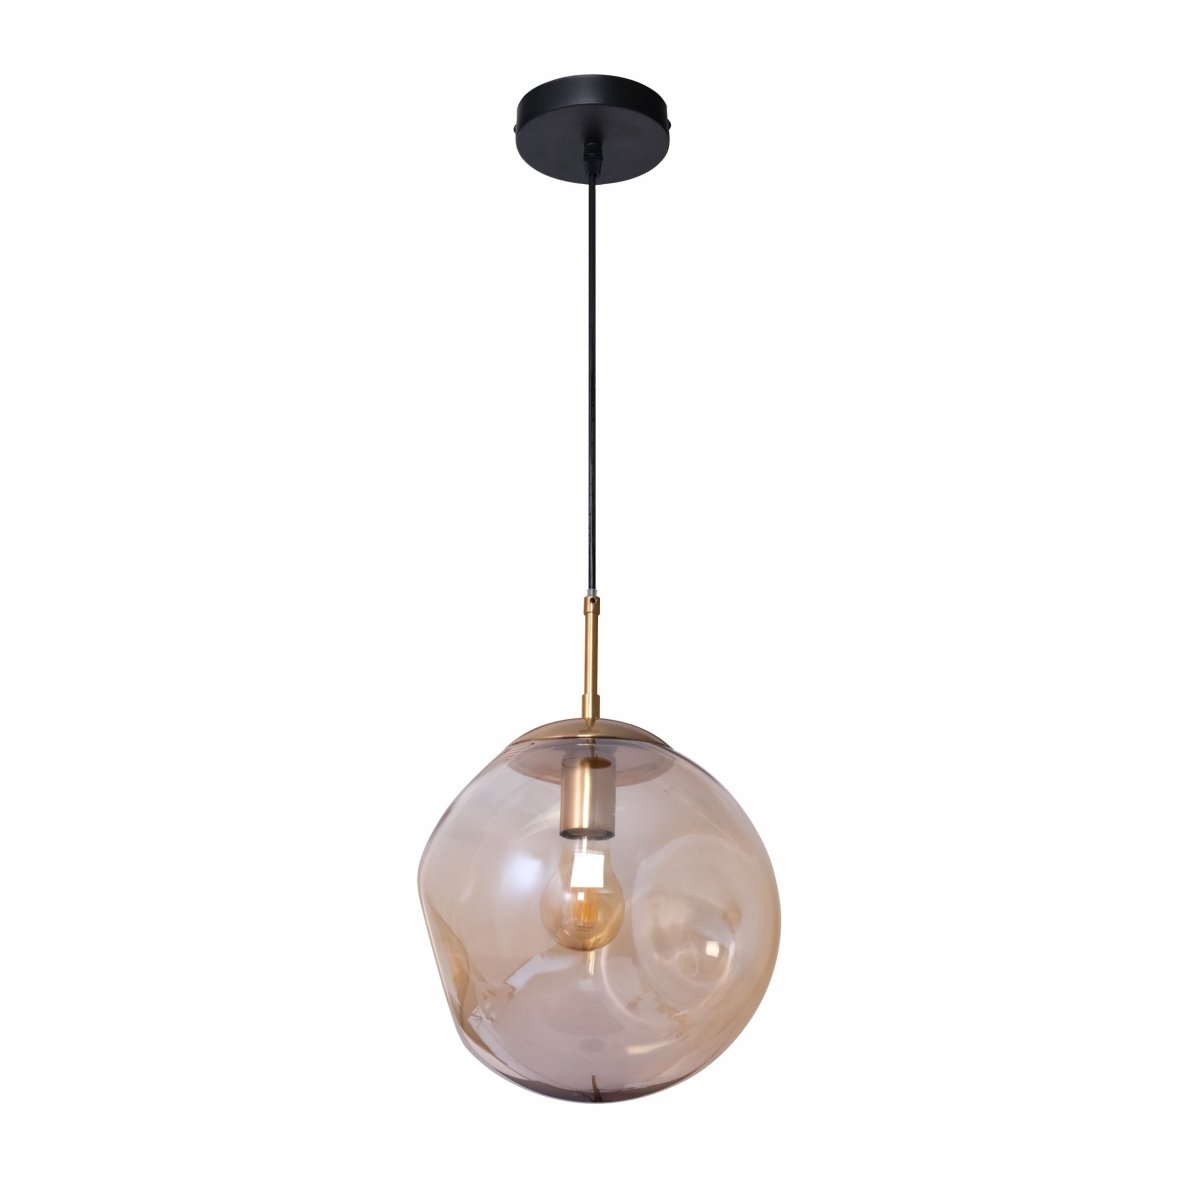 Main image of Amber Glass Crater Pendant Light with E27 Fitting | TEKLED 159-17342